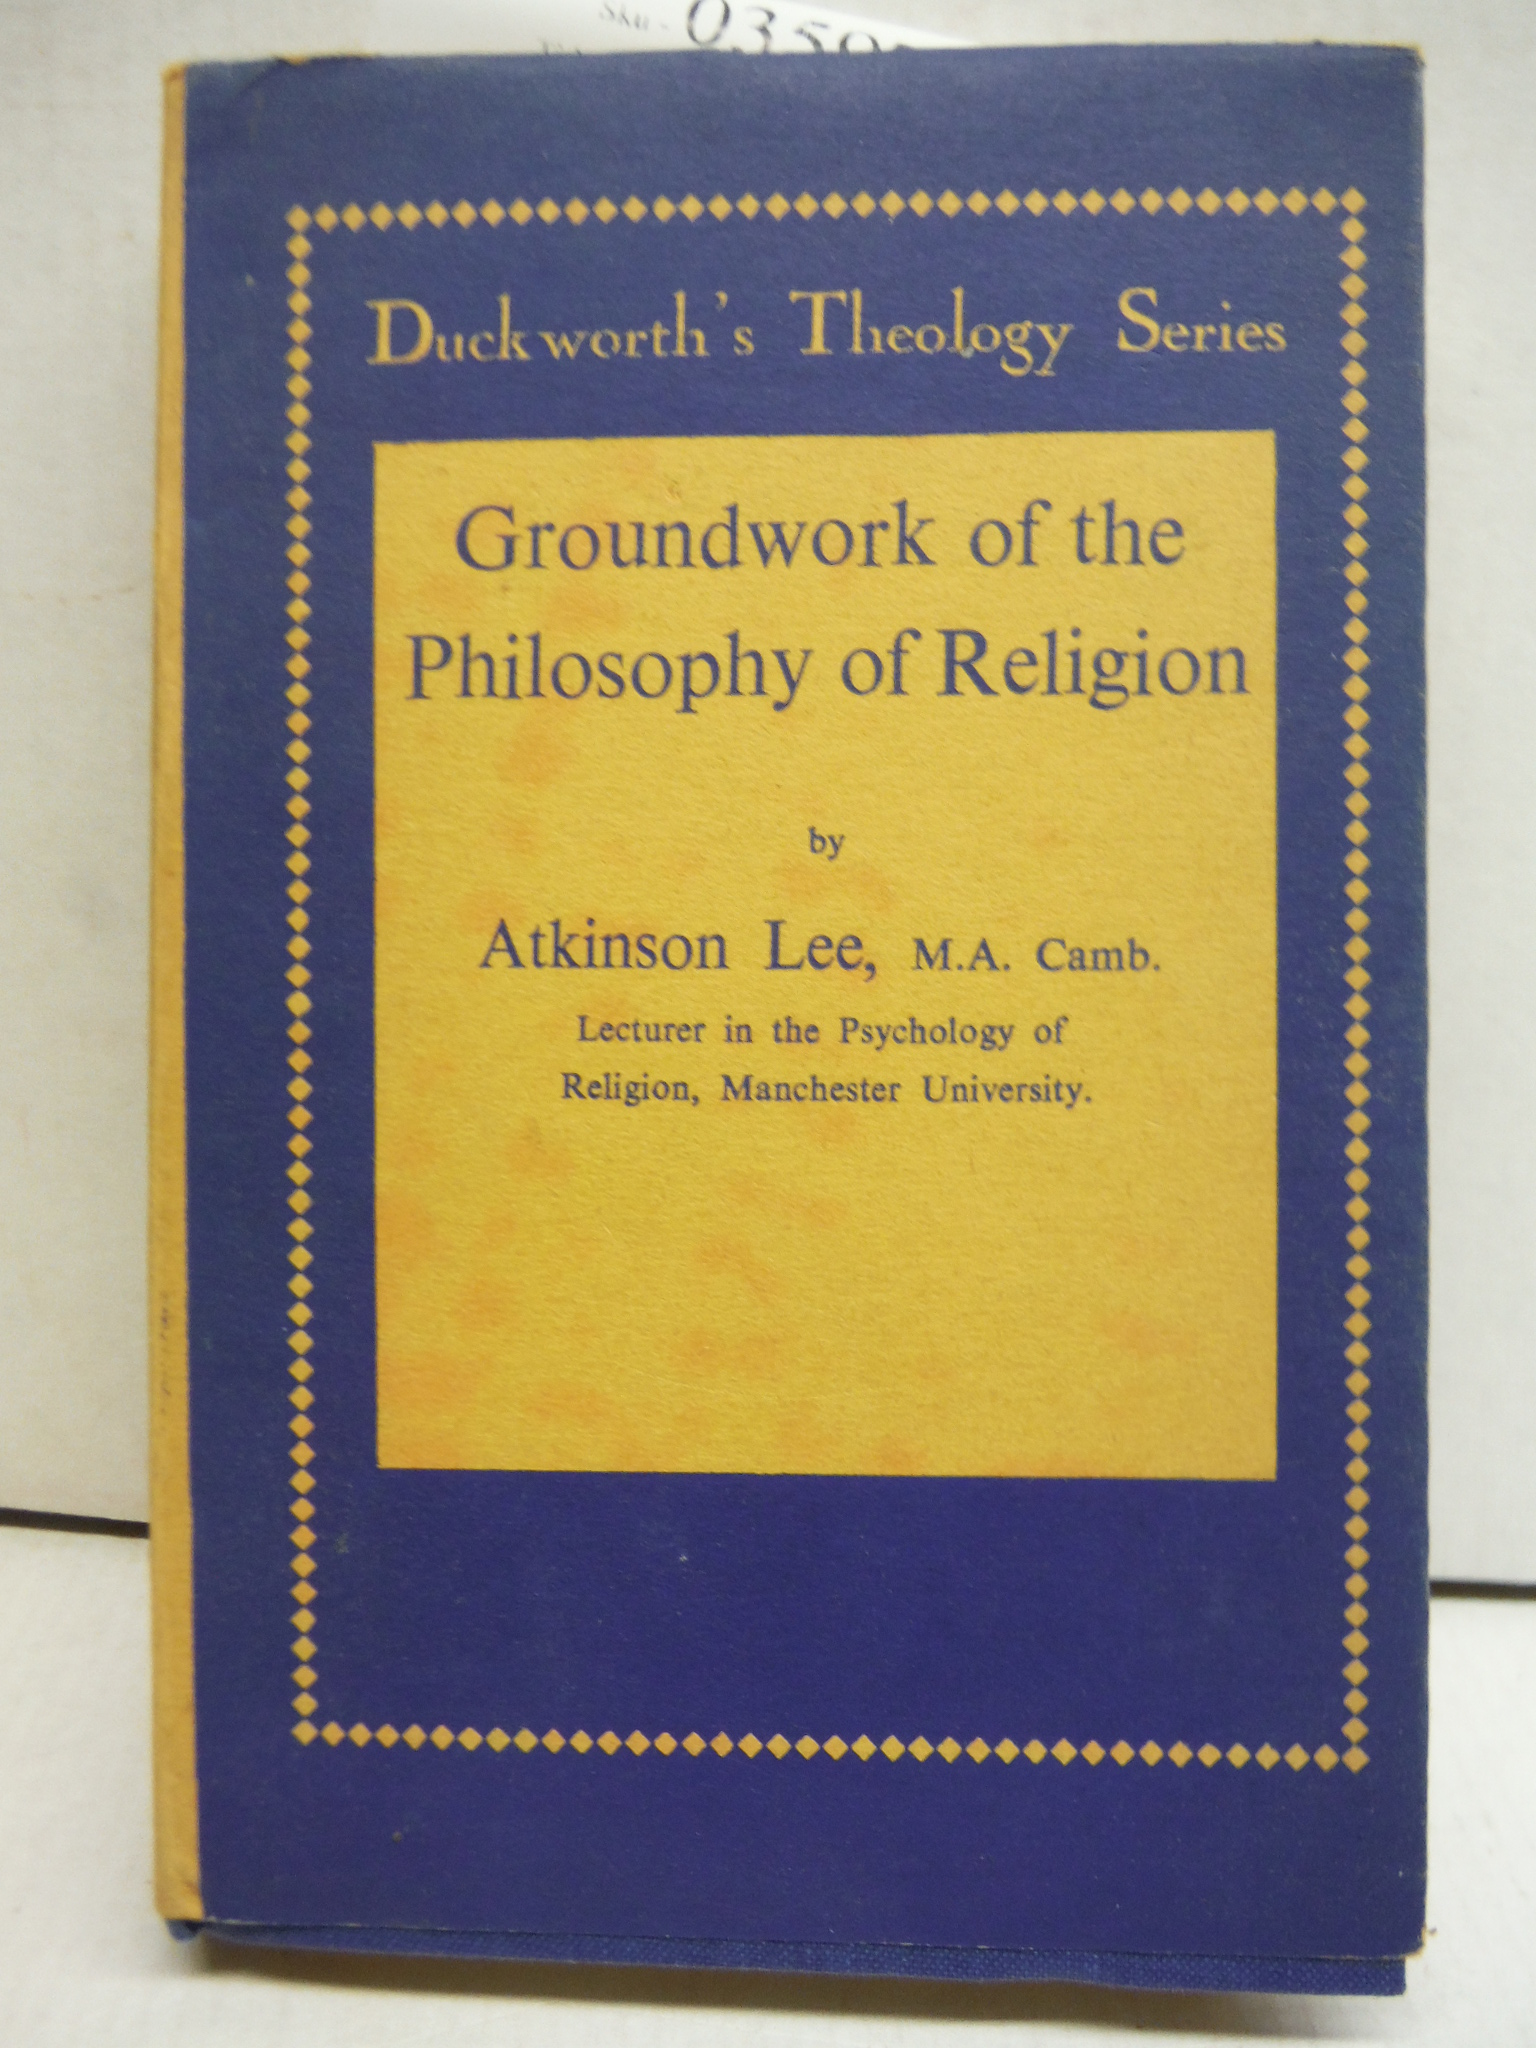  Groundwork of the Philosophy of Religion